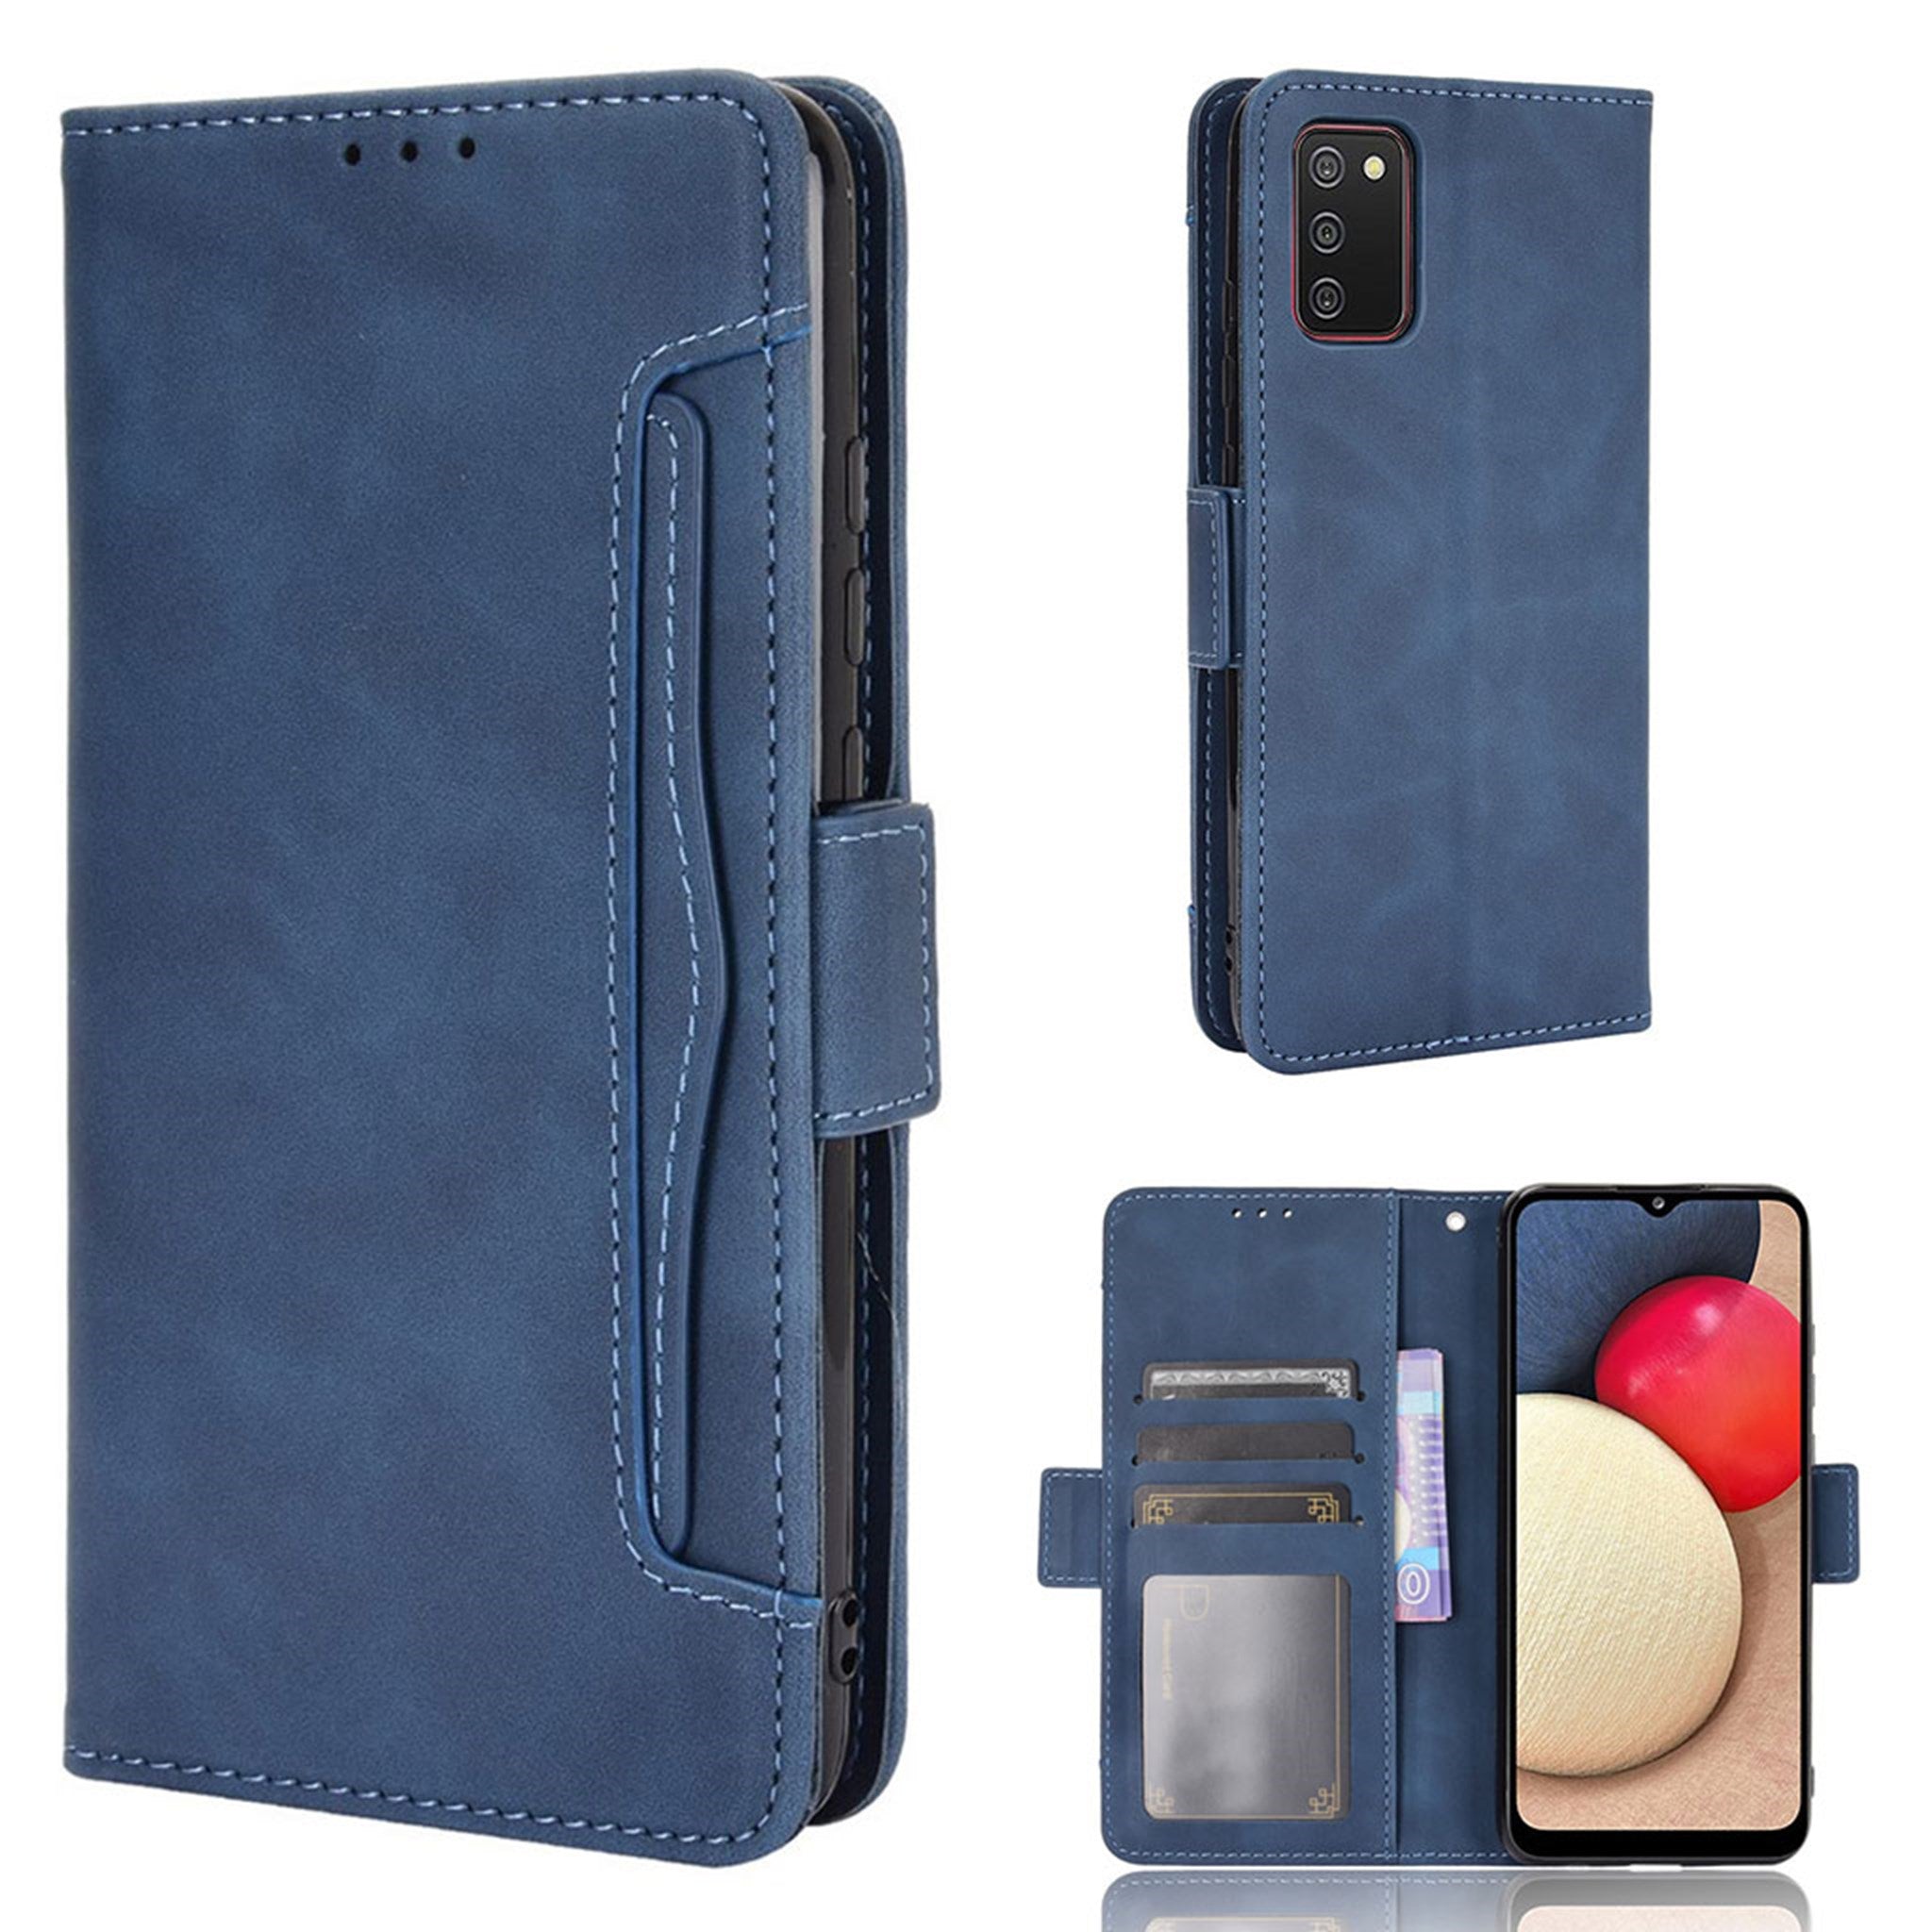 Modern-styled leather wallet case for Samsung Galaxy A03s - Blue